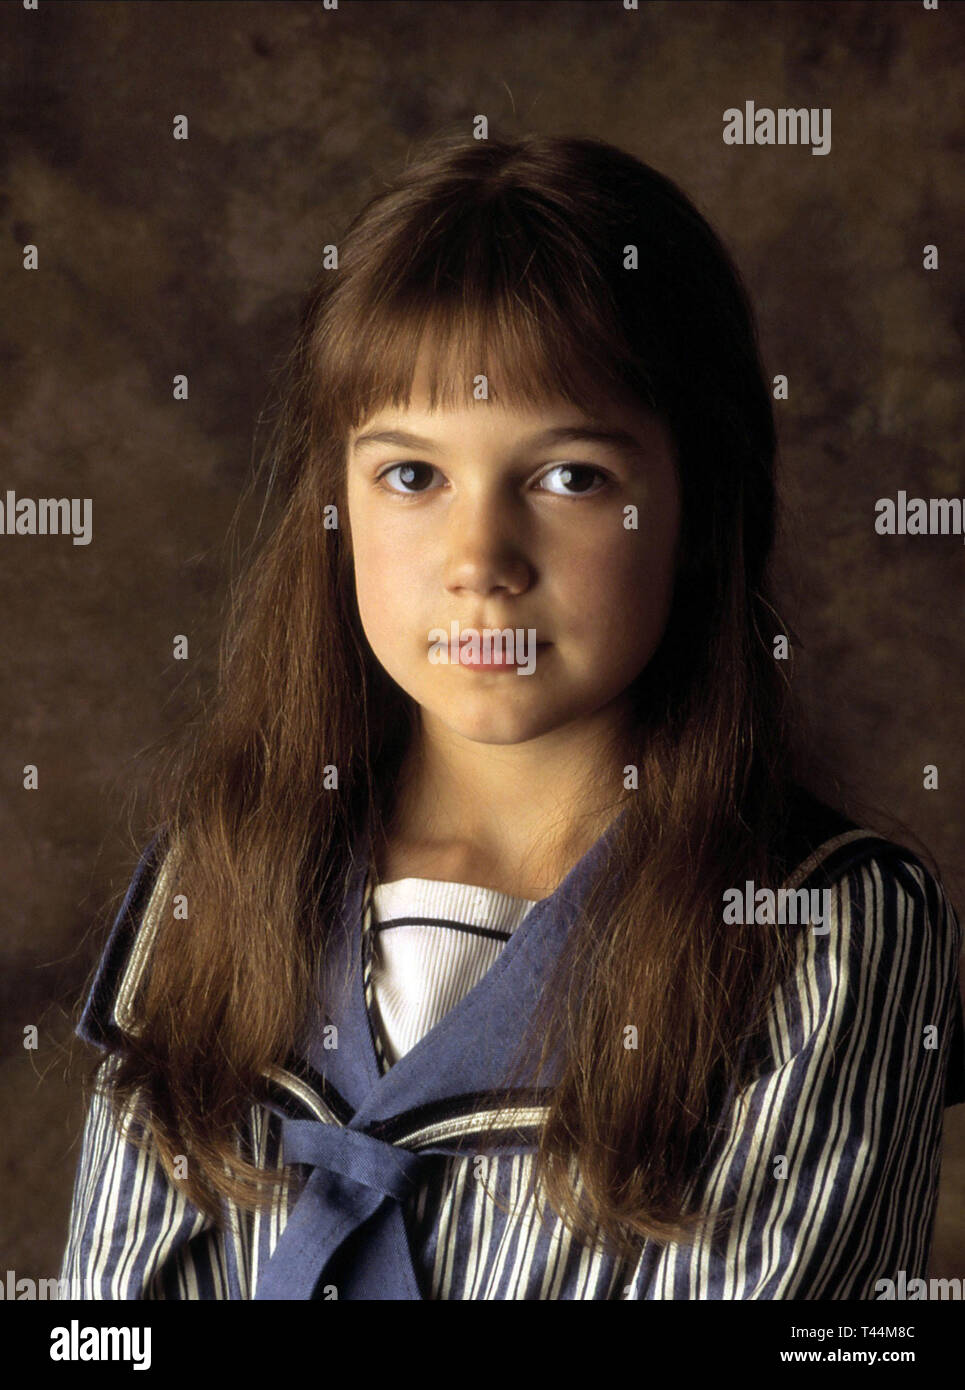 KATE MABERLY in THE SECRET GARDEN (1993). Credit: AMERICAN ZOETROPE/WARNER  BROTHERS / Album Stock Photo - Alamy